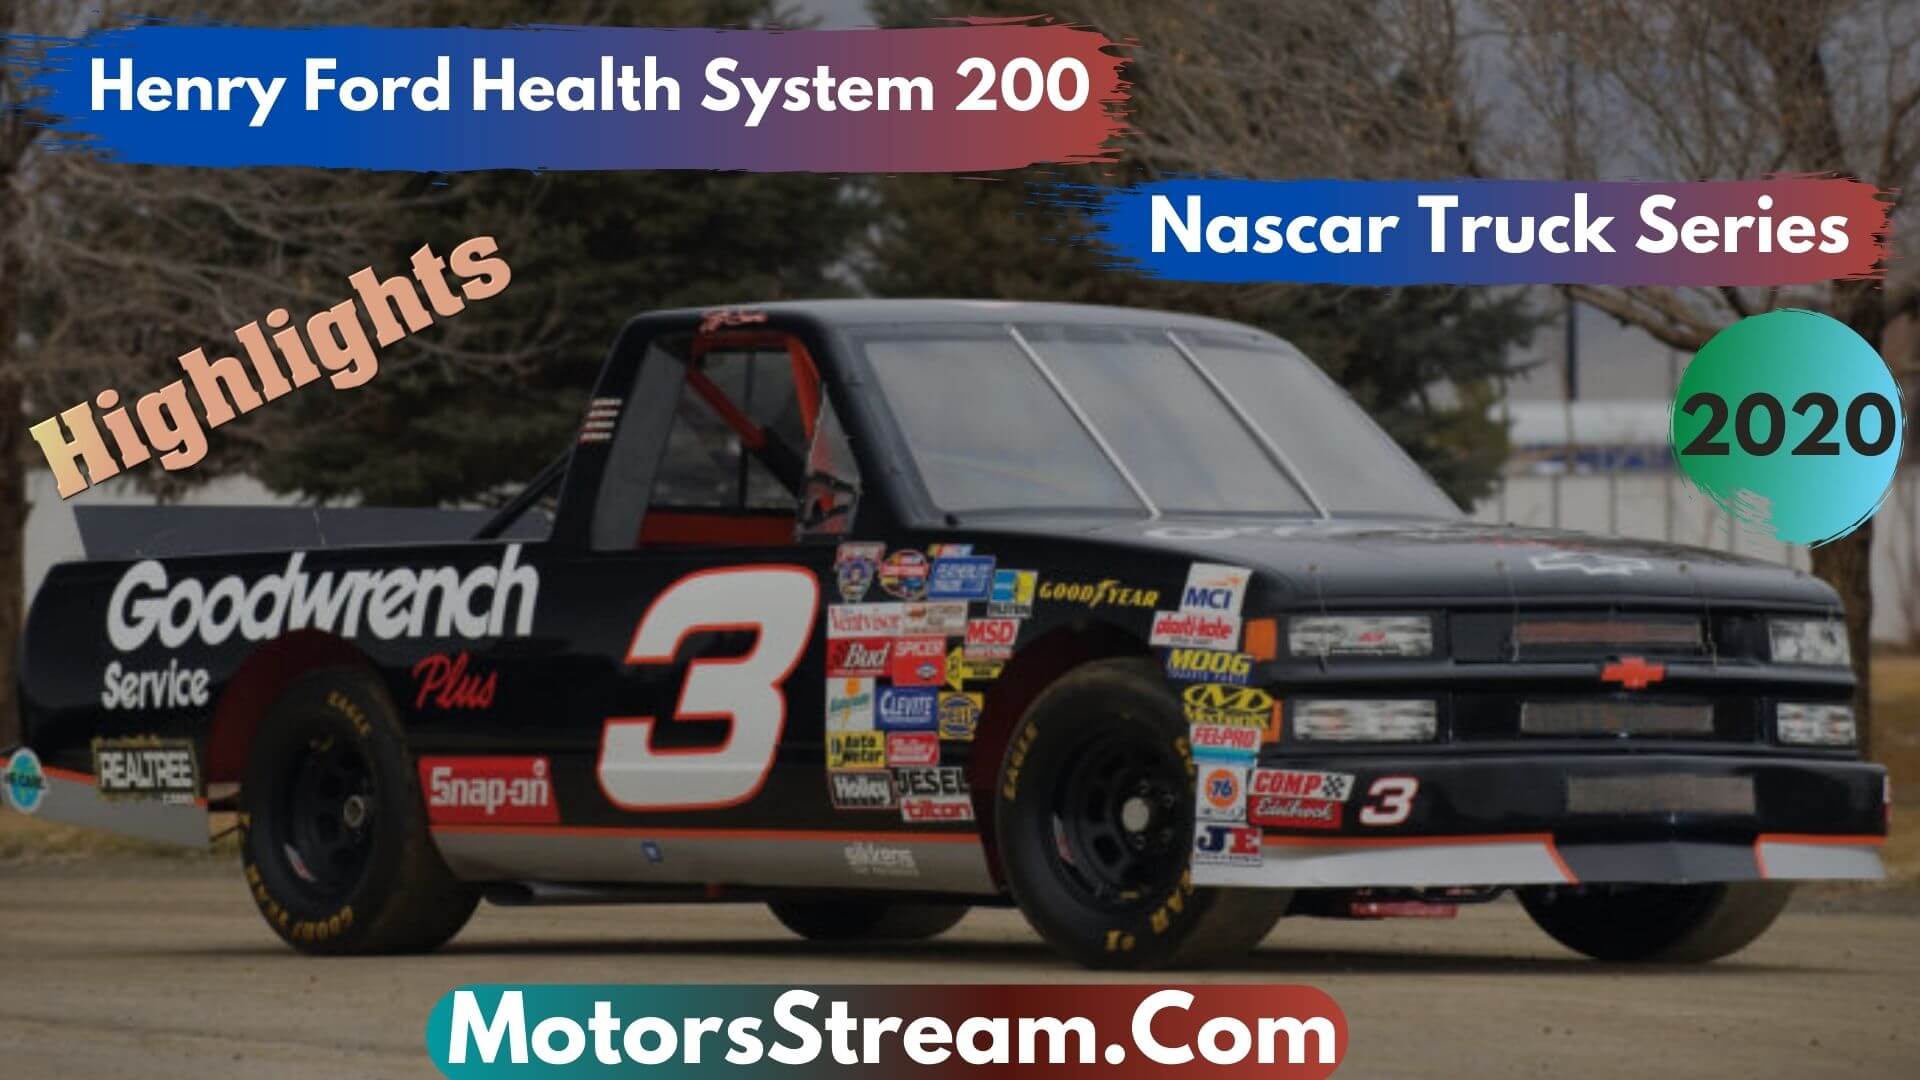 Henry Ford Health System 200 Highlights 2020 Truck Series